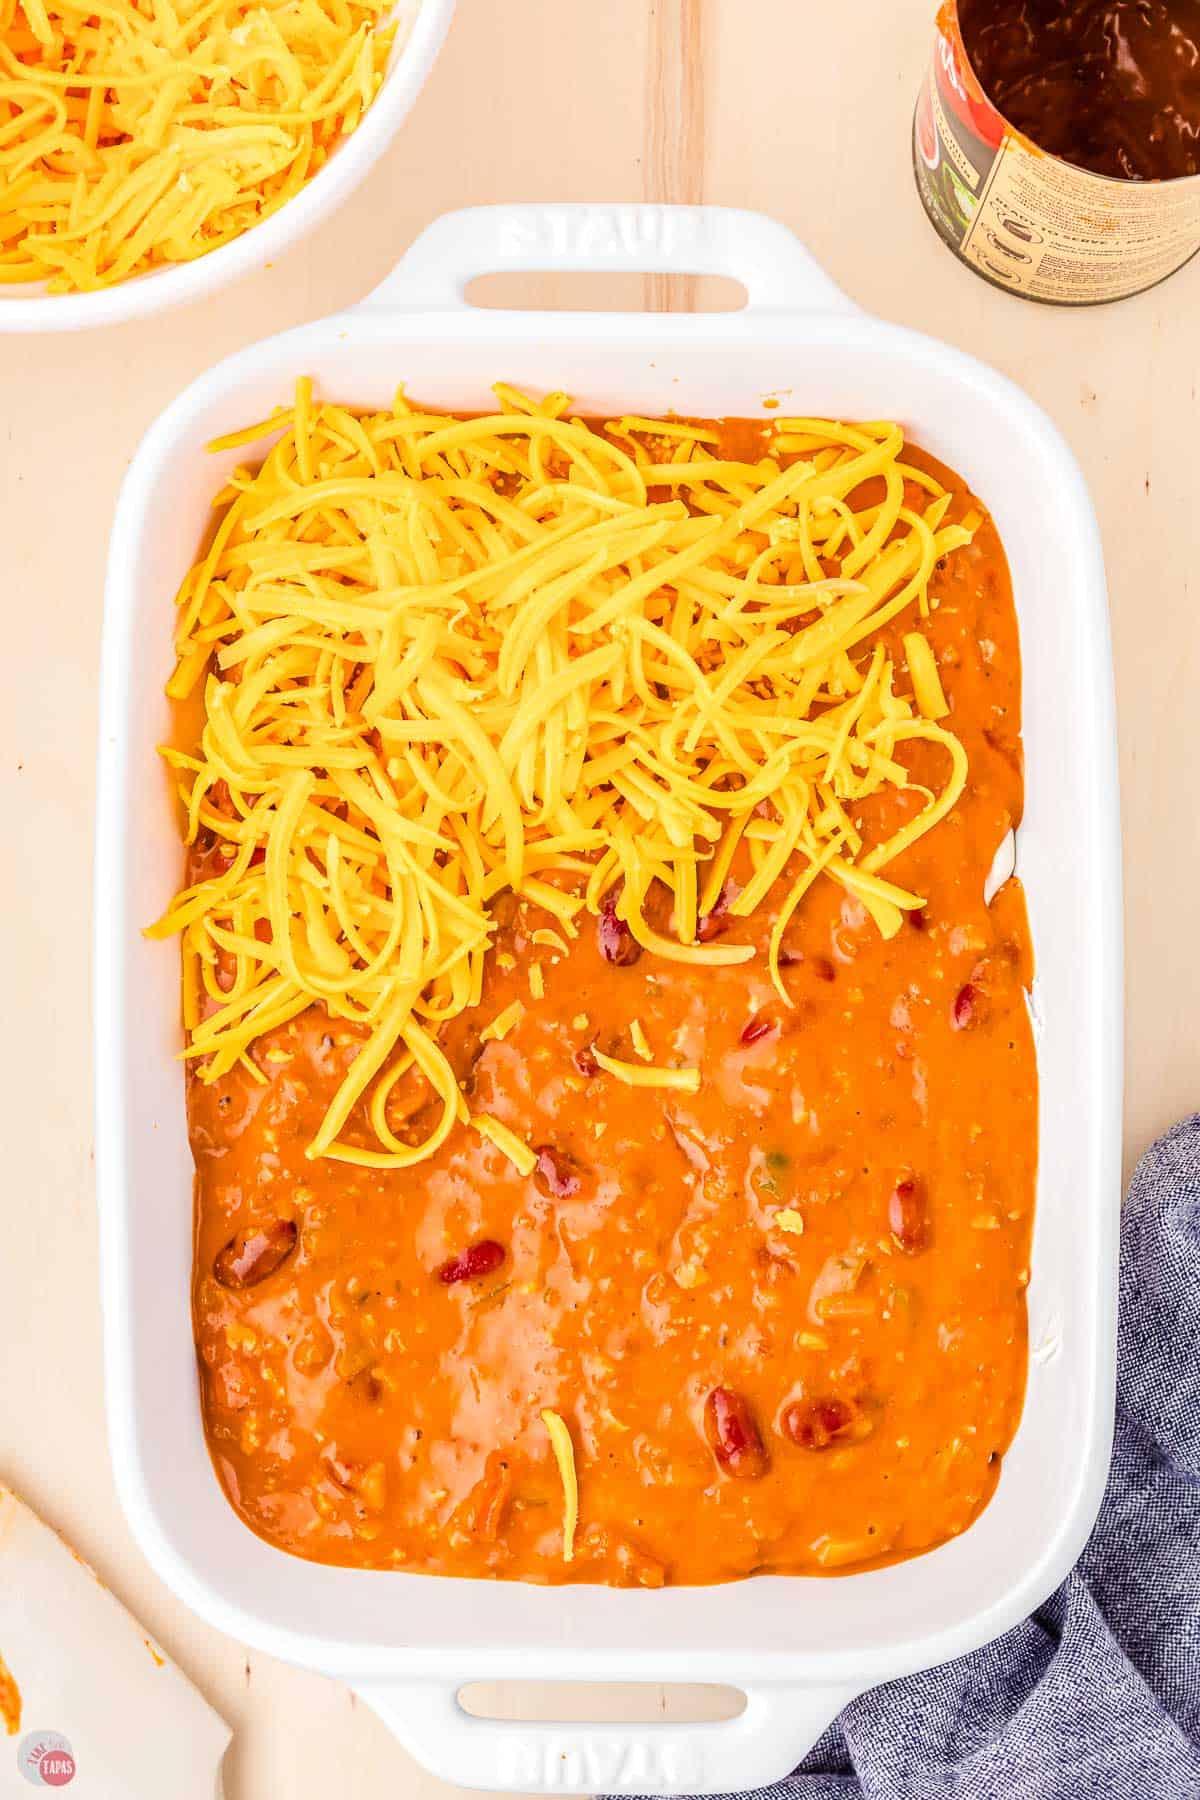 chili half topped with shredded cheese in a white rectangle dish